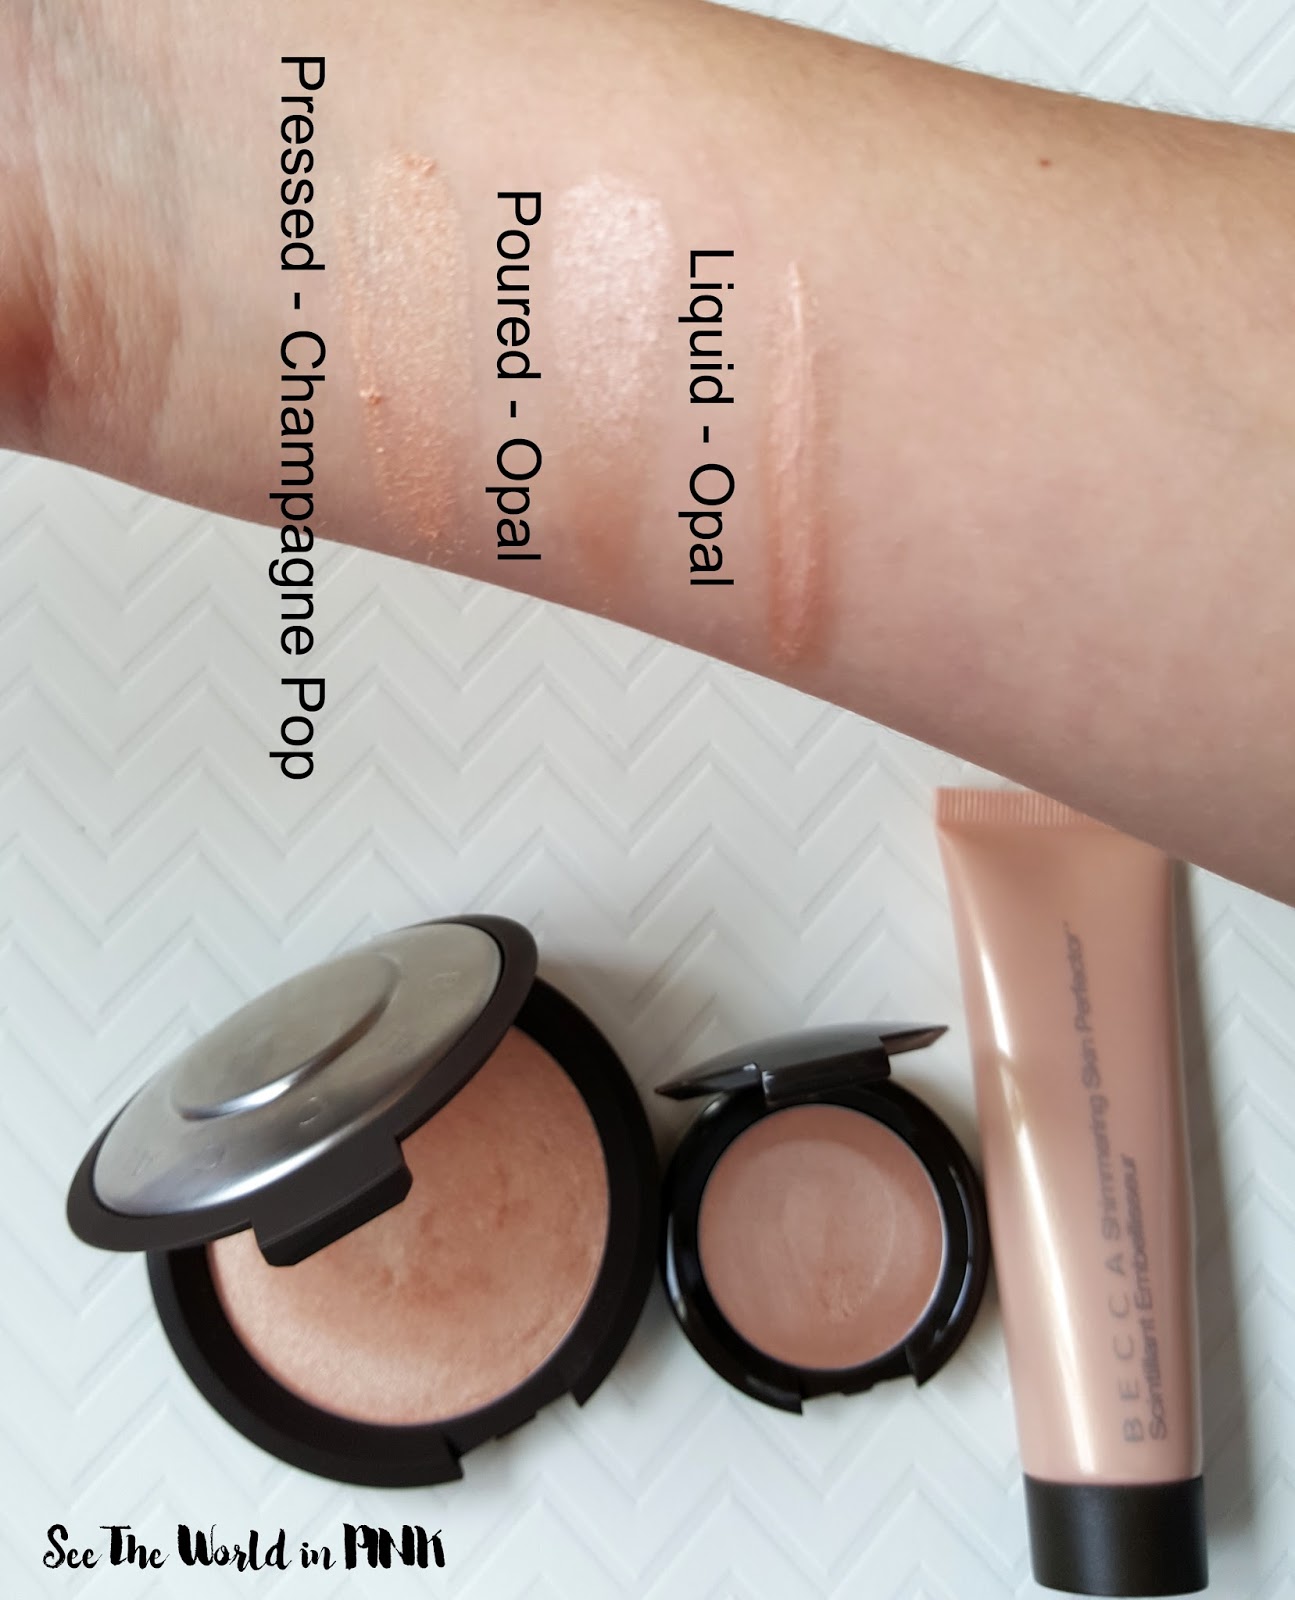 Becca Highlighter Comparison and Reviews - "Shimmering Skin Perfector" Pressed vs. Poured vs. Liquid 